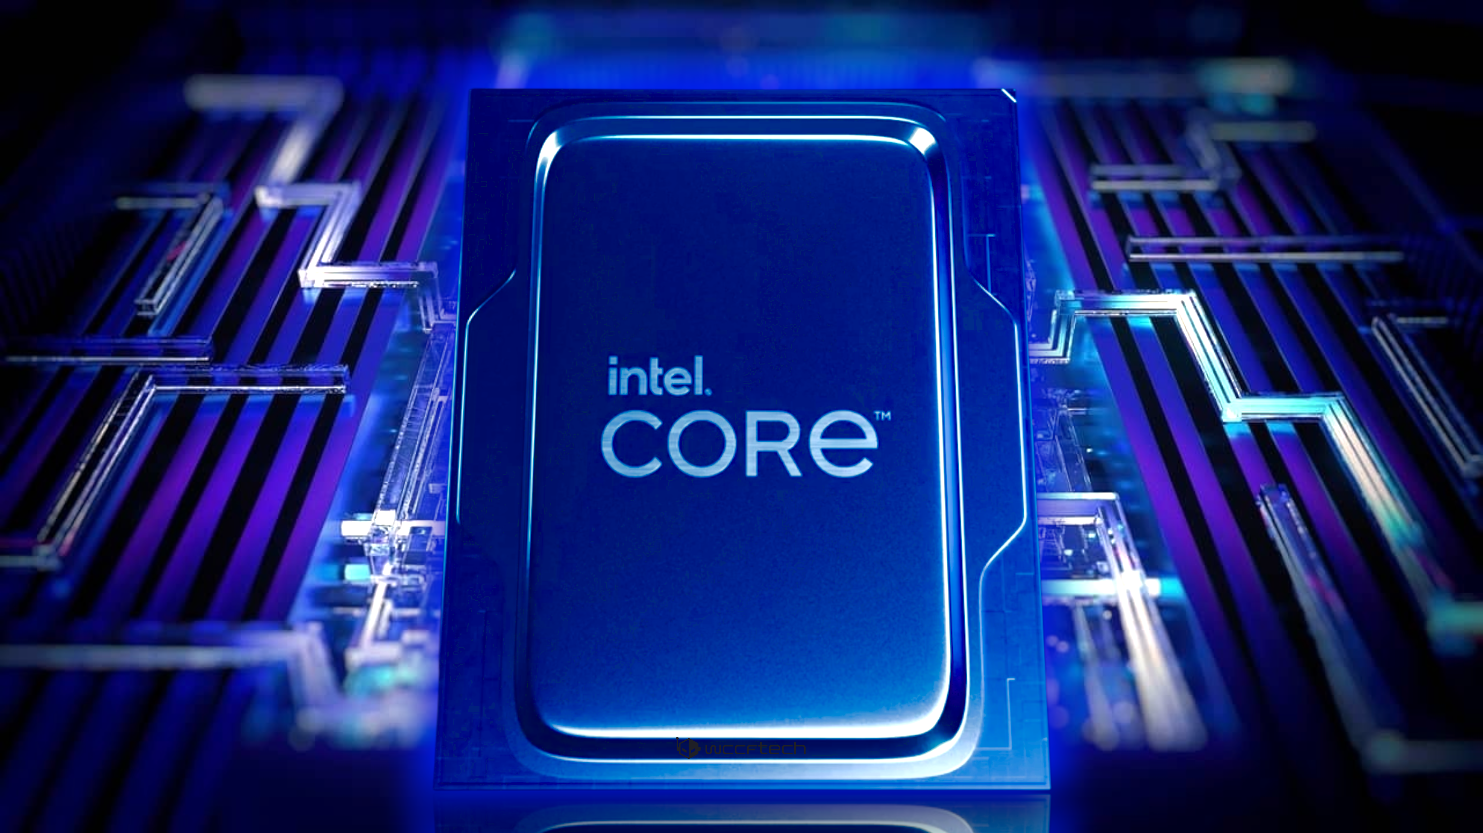 Arrow Lake to offer 24-core and 20-core configurations